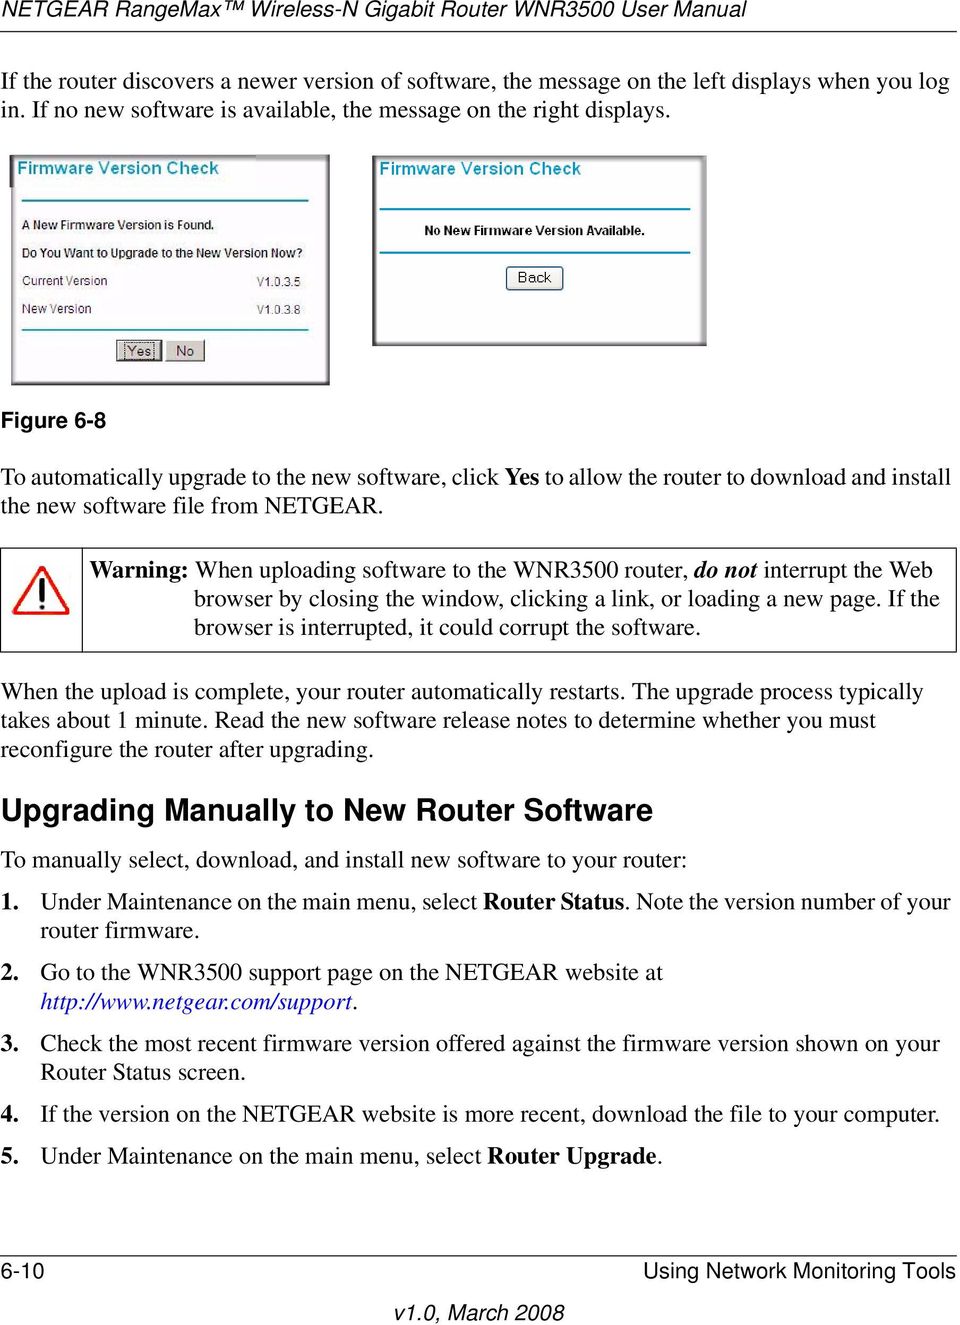 Warning: When uploading software to the WNR3500 router, do not interrupt the Web browser by closing the window, clicking a link, or loading a new page.